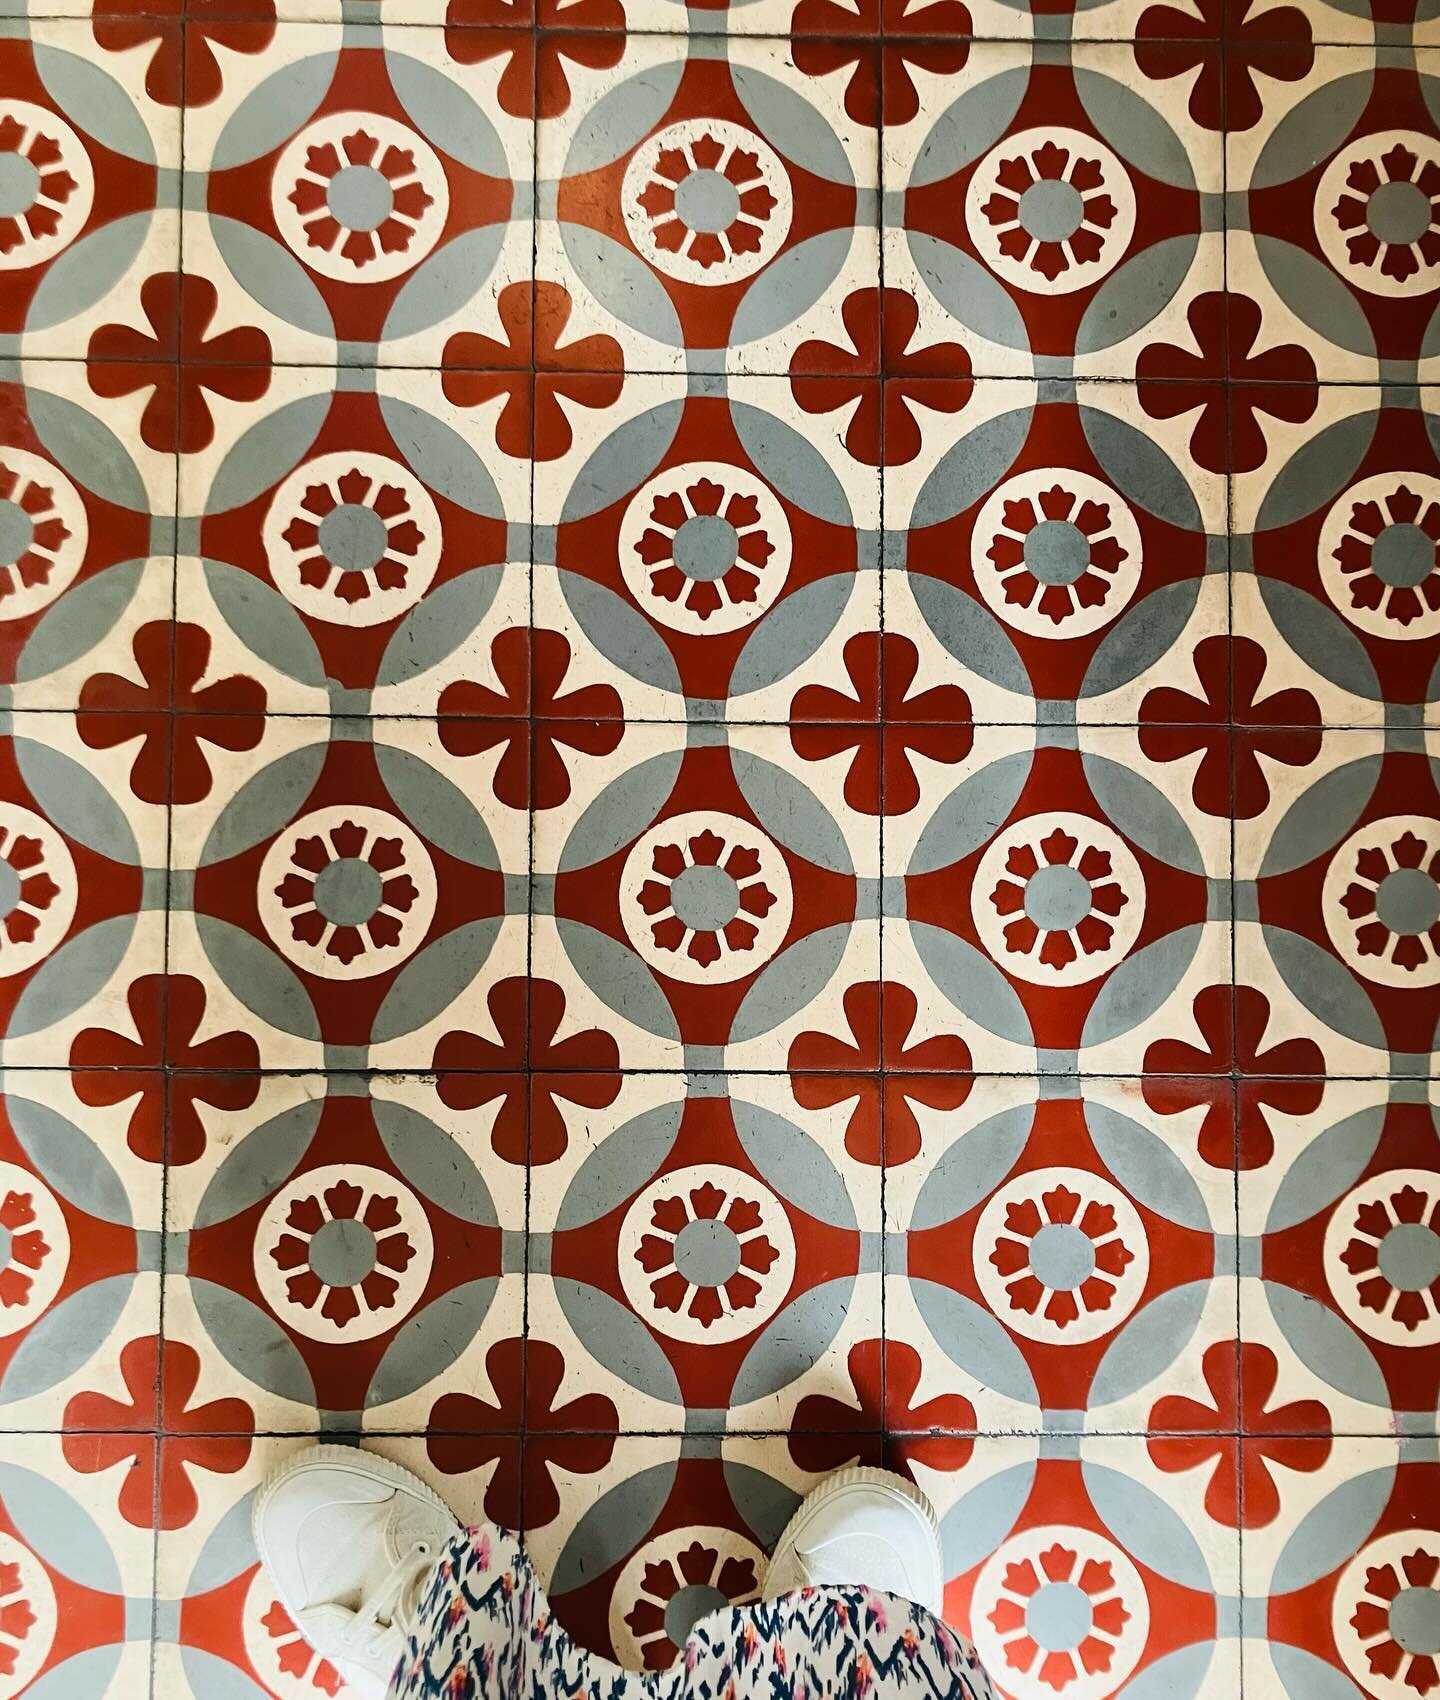 Tiles are my go to source for inspiration. I found these beautiful ones in a sweet shop in Paris. Such a gorgeous red.

#tiles #inspiration #paris #redtiles